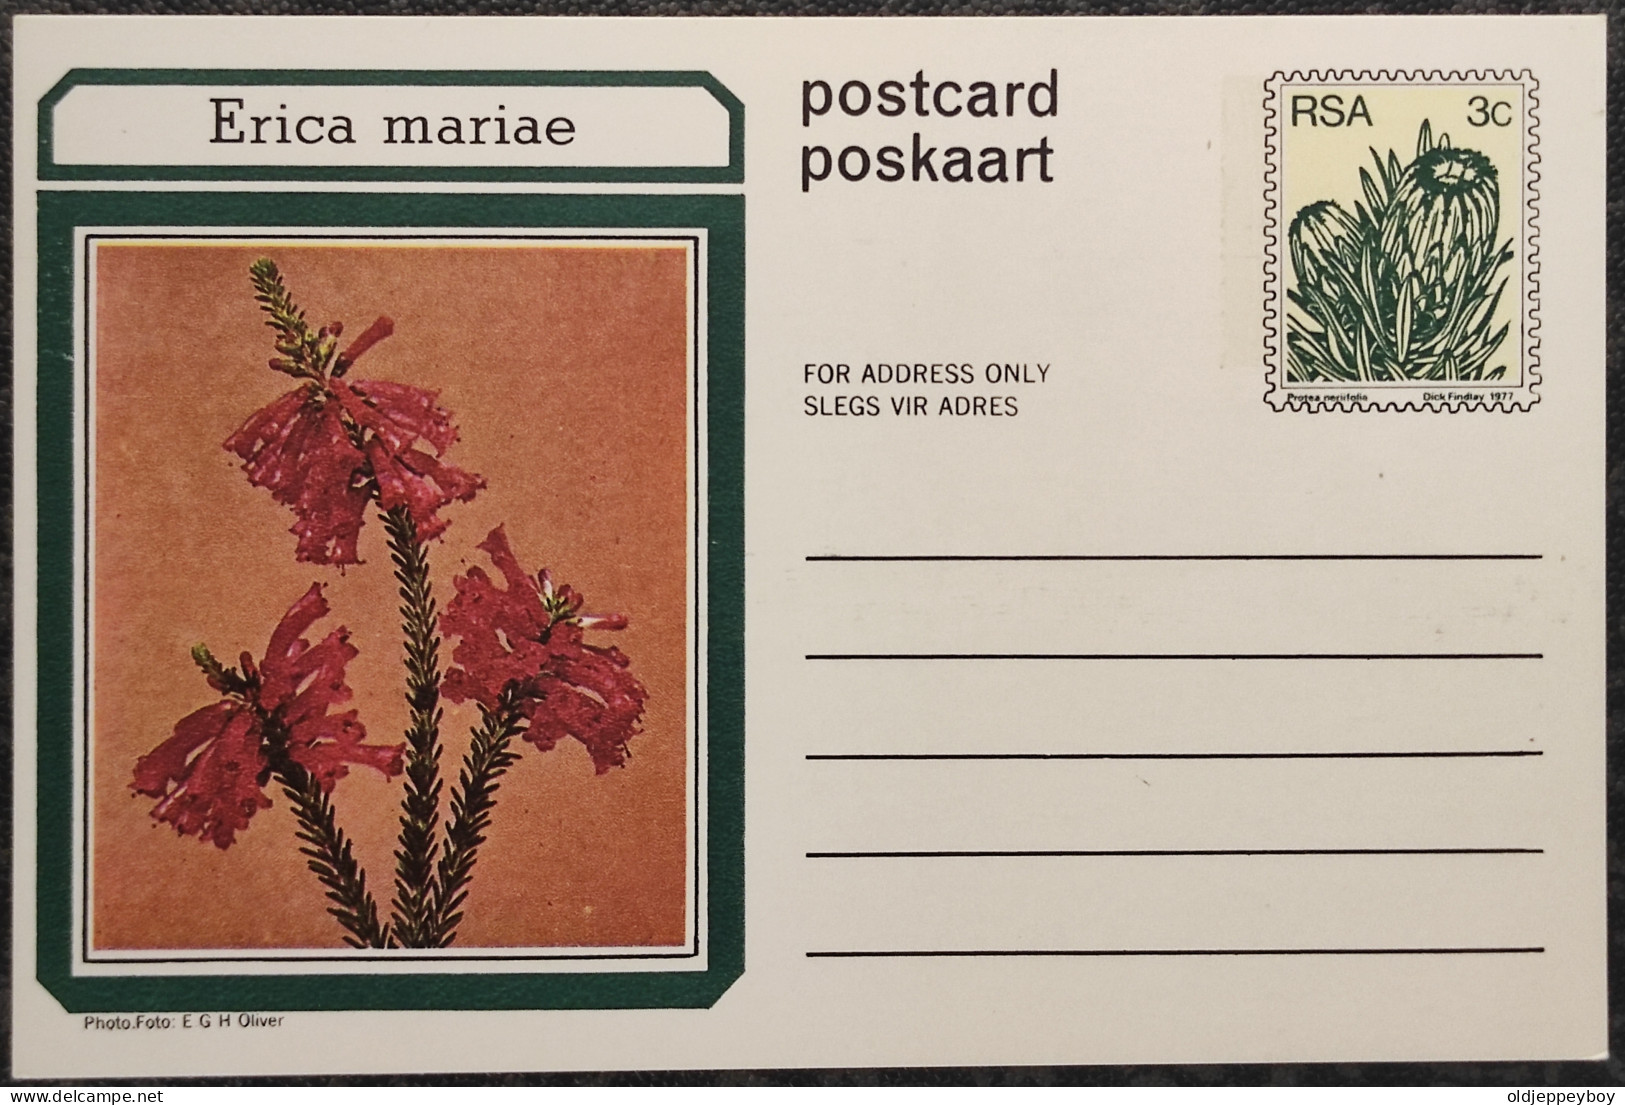 3c SOUTH AFRICA Postal STATIONERY CARD Illus ERICA MARIAE FLOWER Cover Stamps Flowers Rsa - Storia Postale